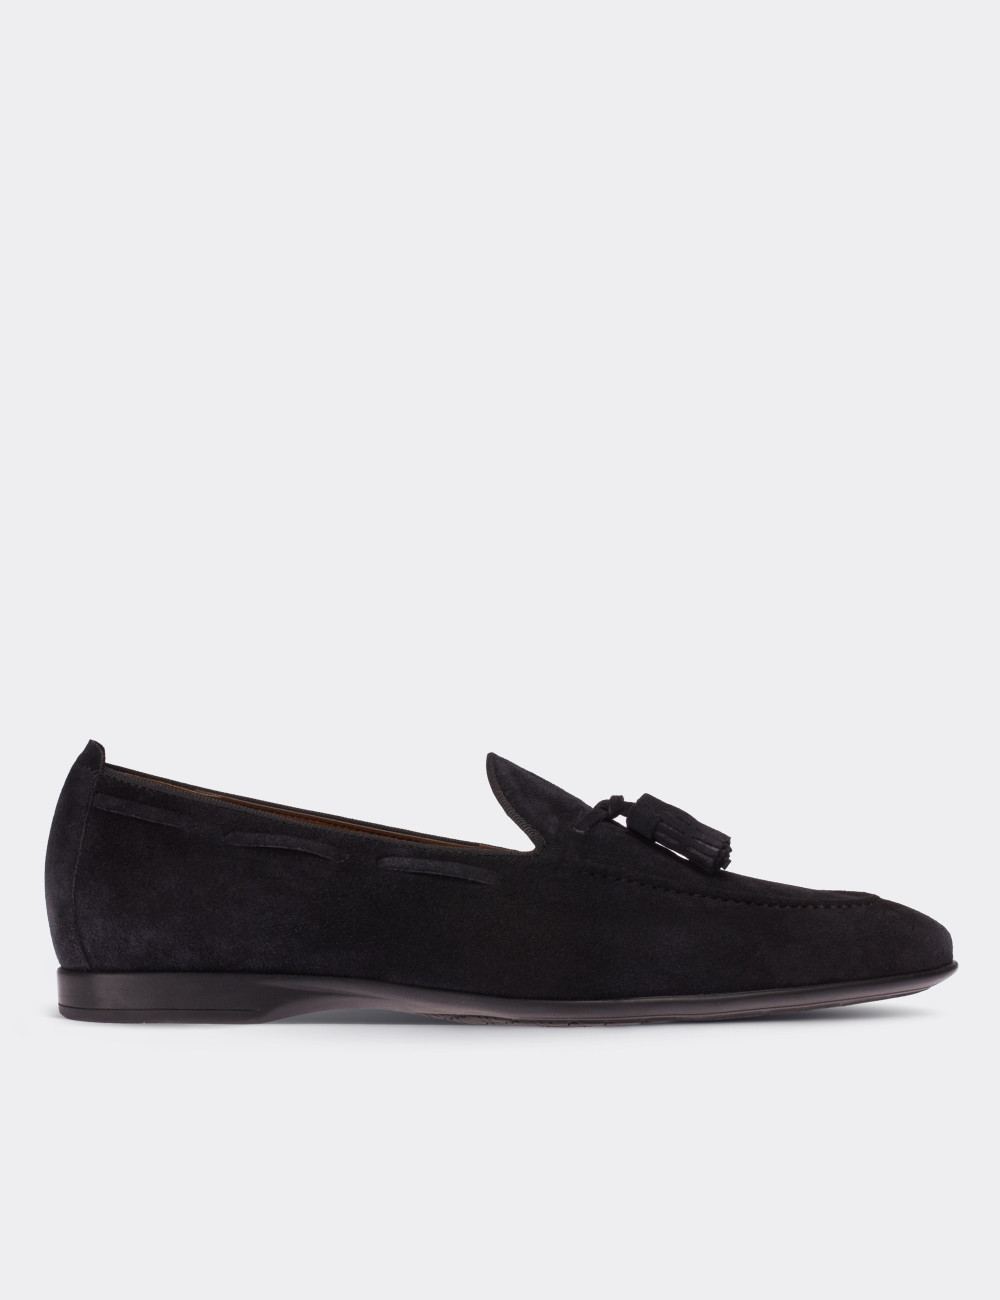 Navy Suede Leather Loafers - 01642MLCVC01